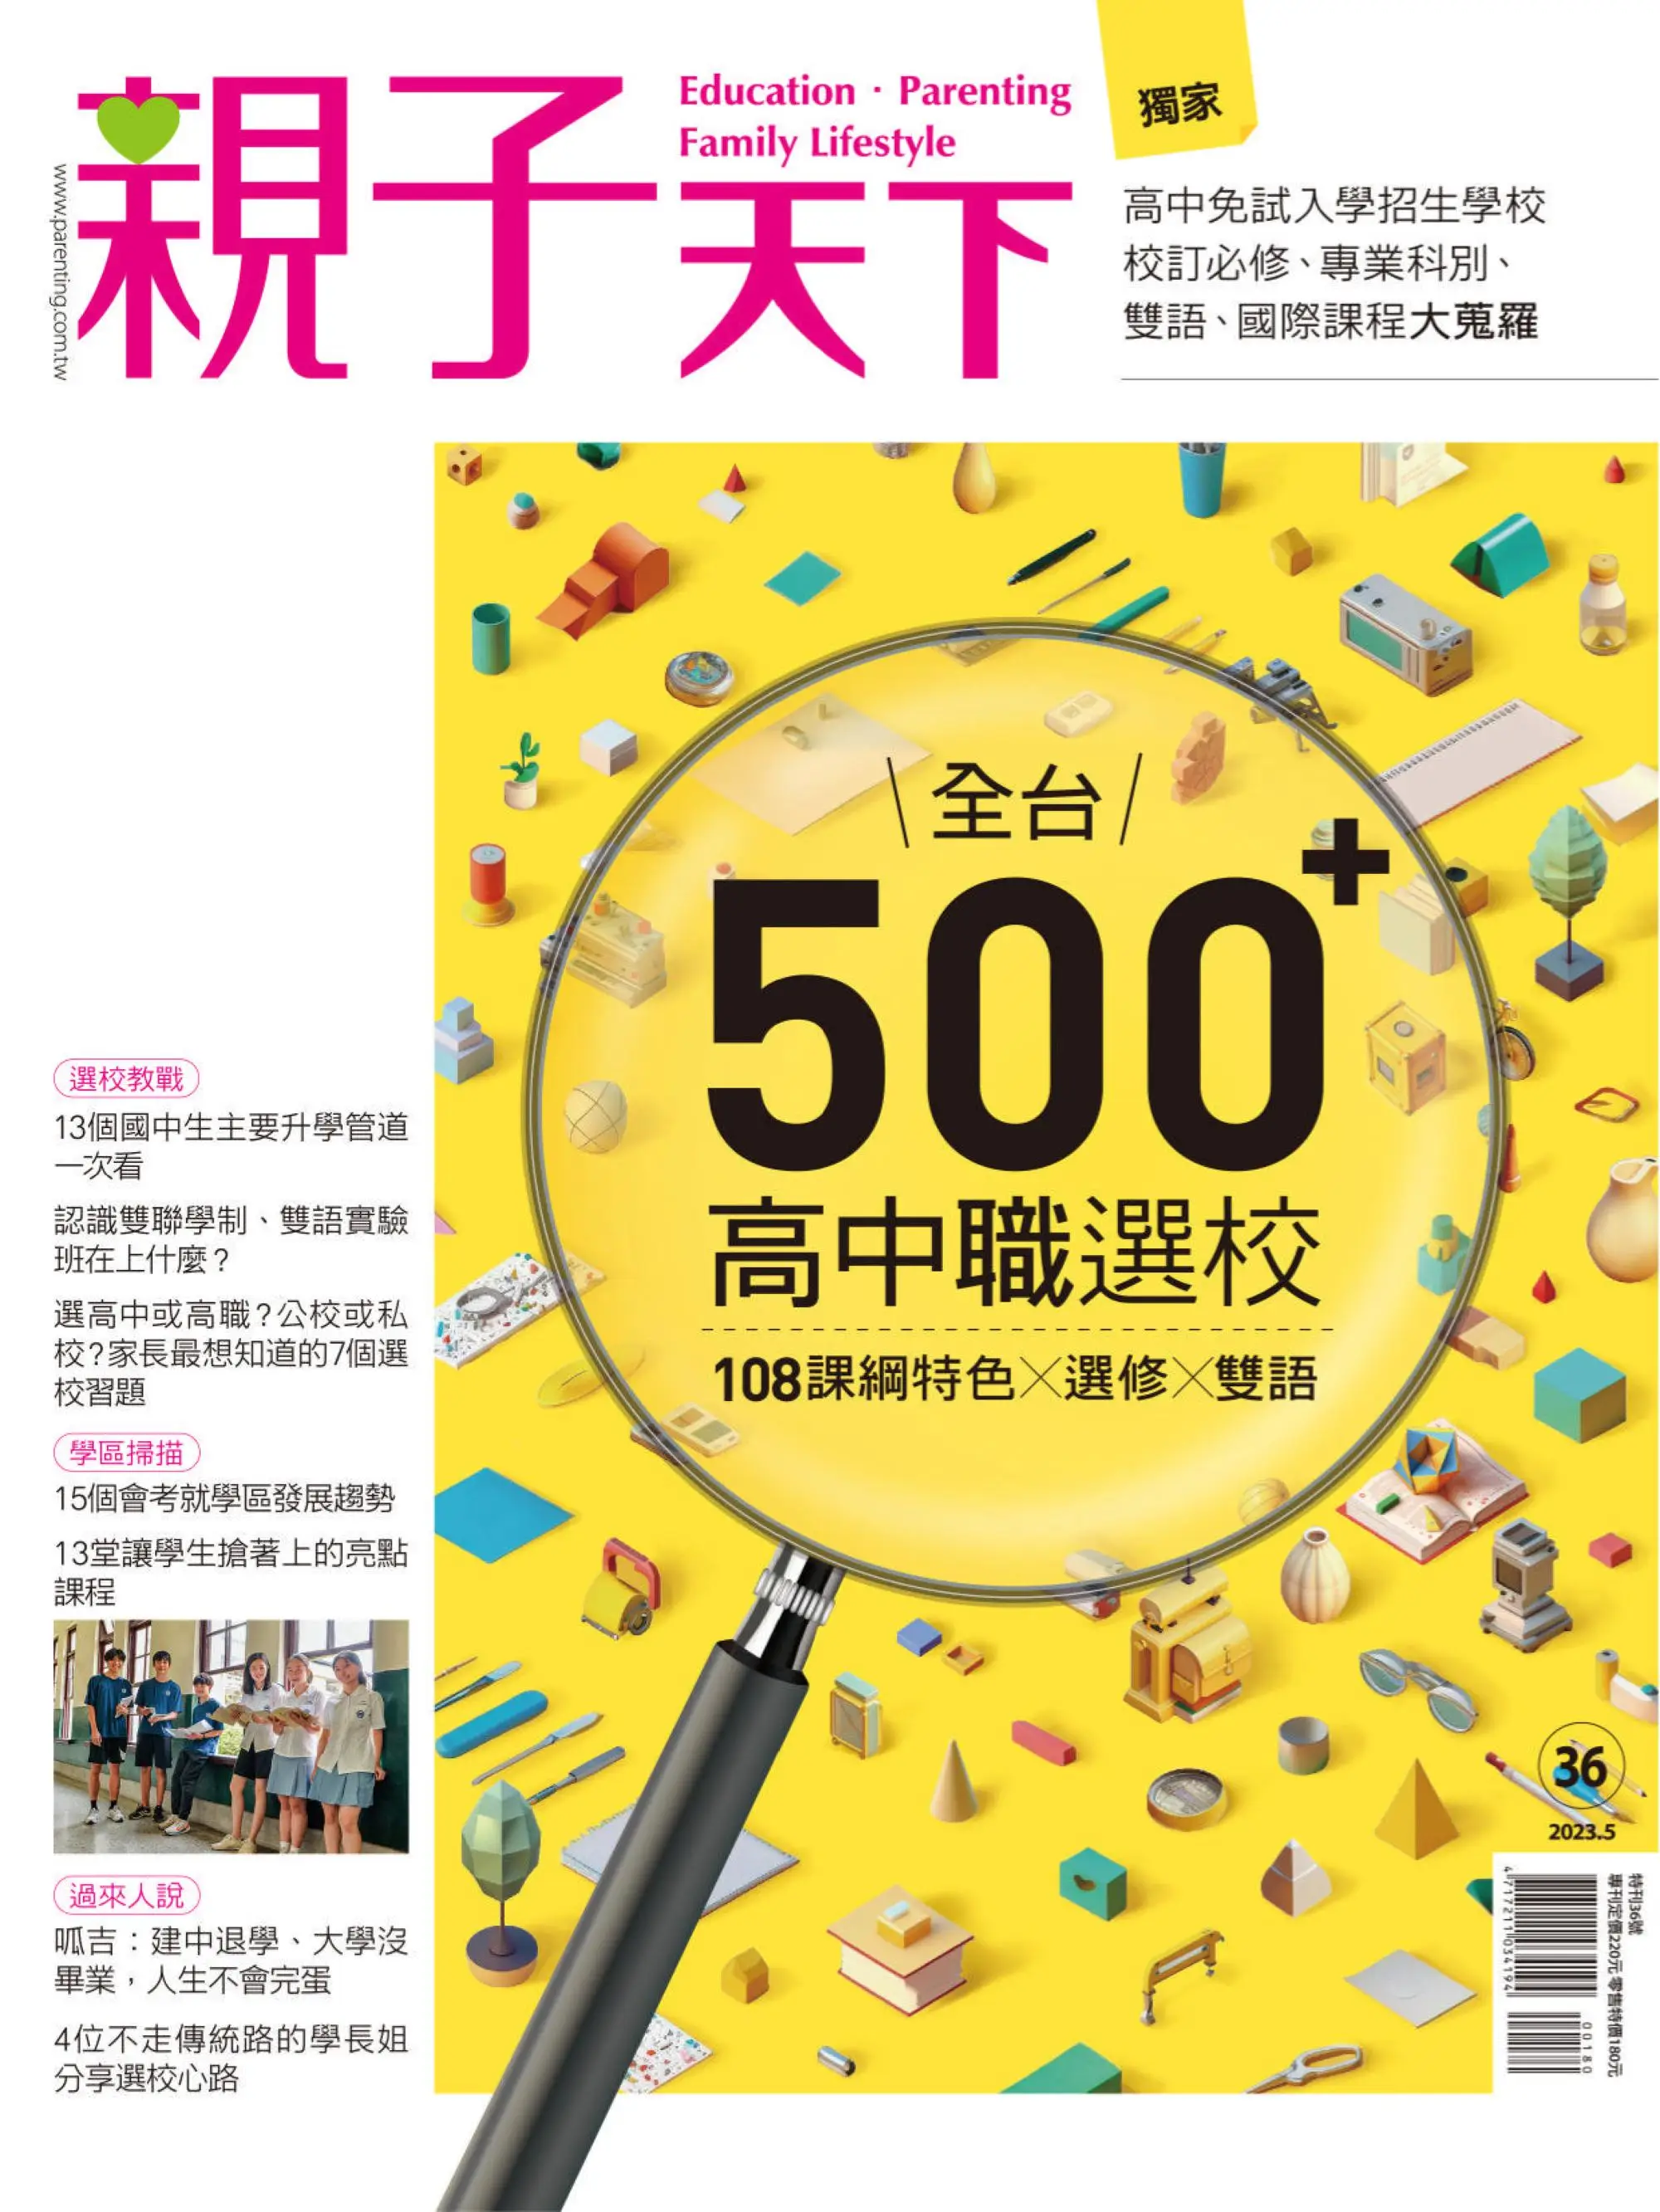 CommonWealth Parenting Special Issue 親子天下特刊 2023年5月